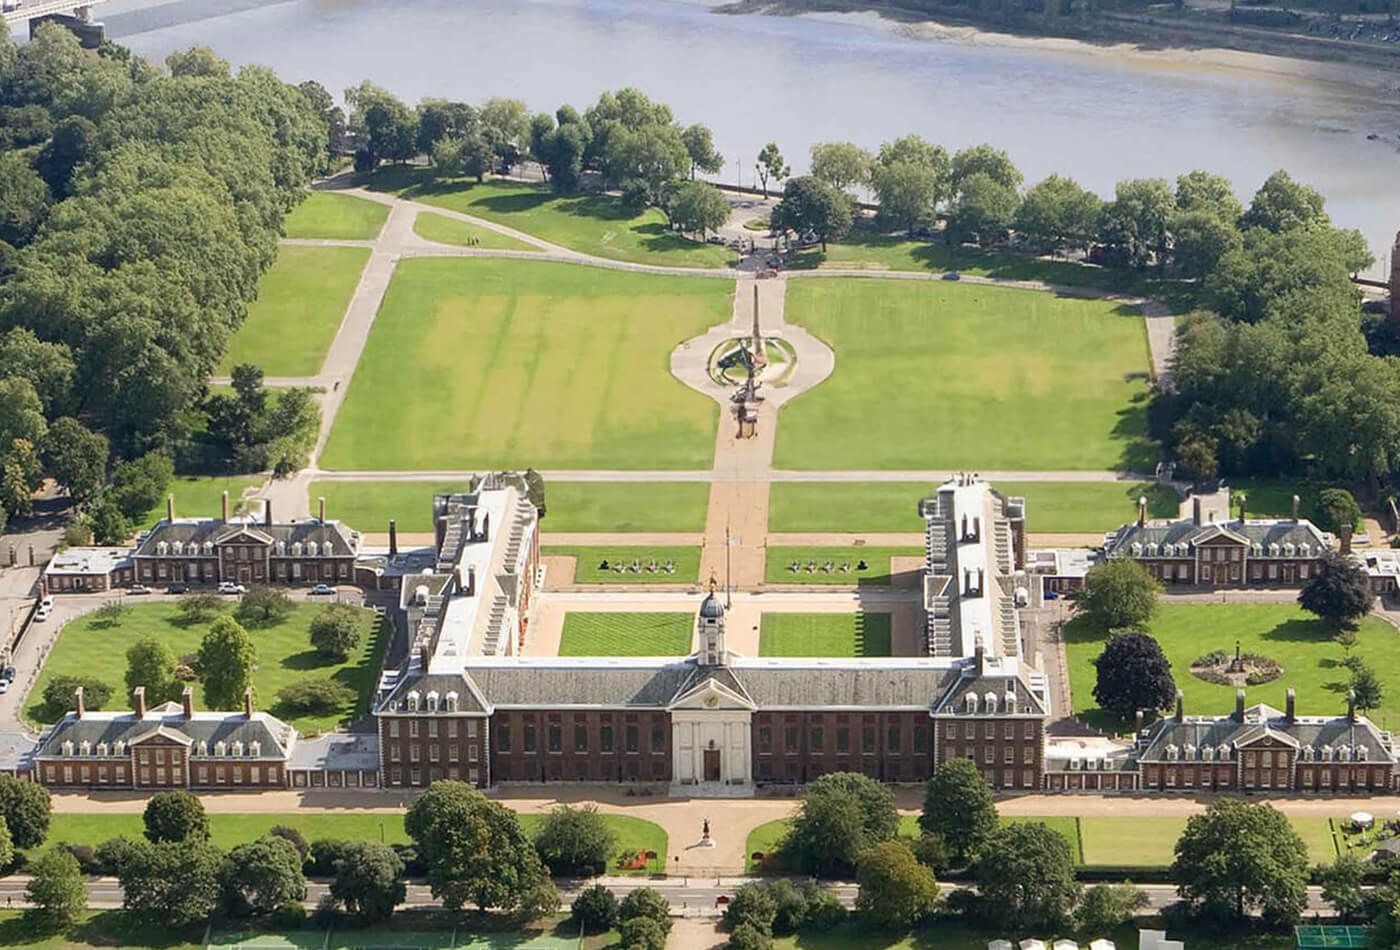 Birds eye view of grand building, green gardens and parks